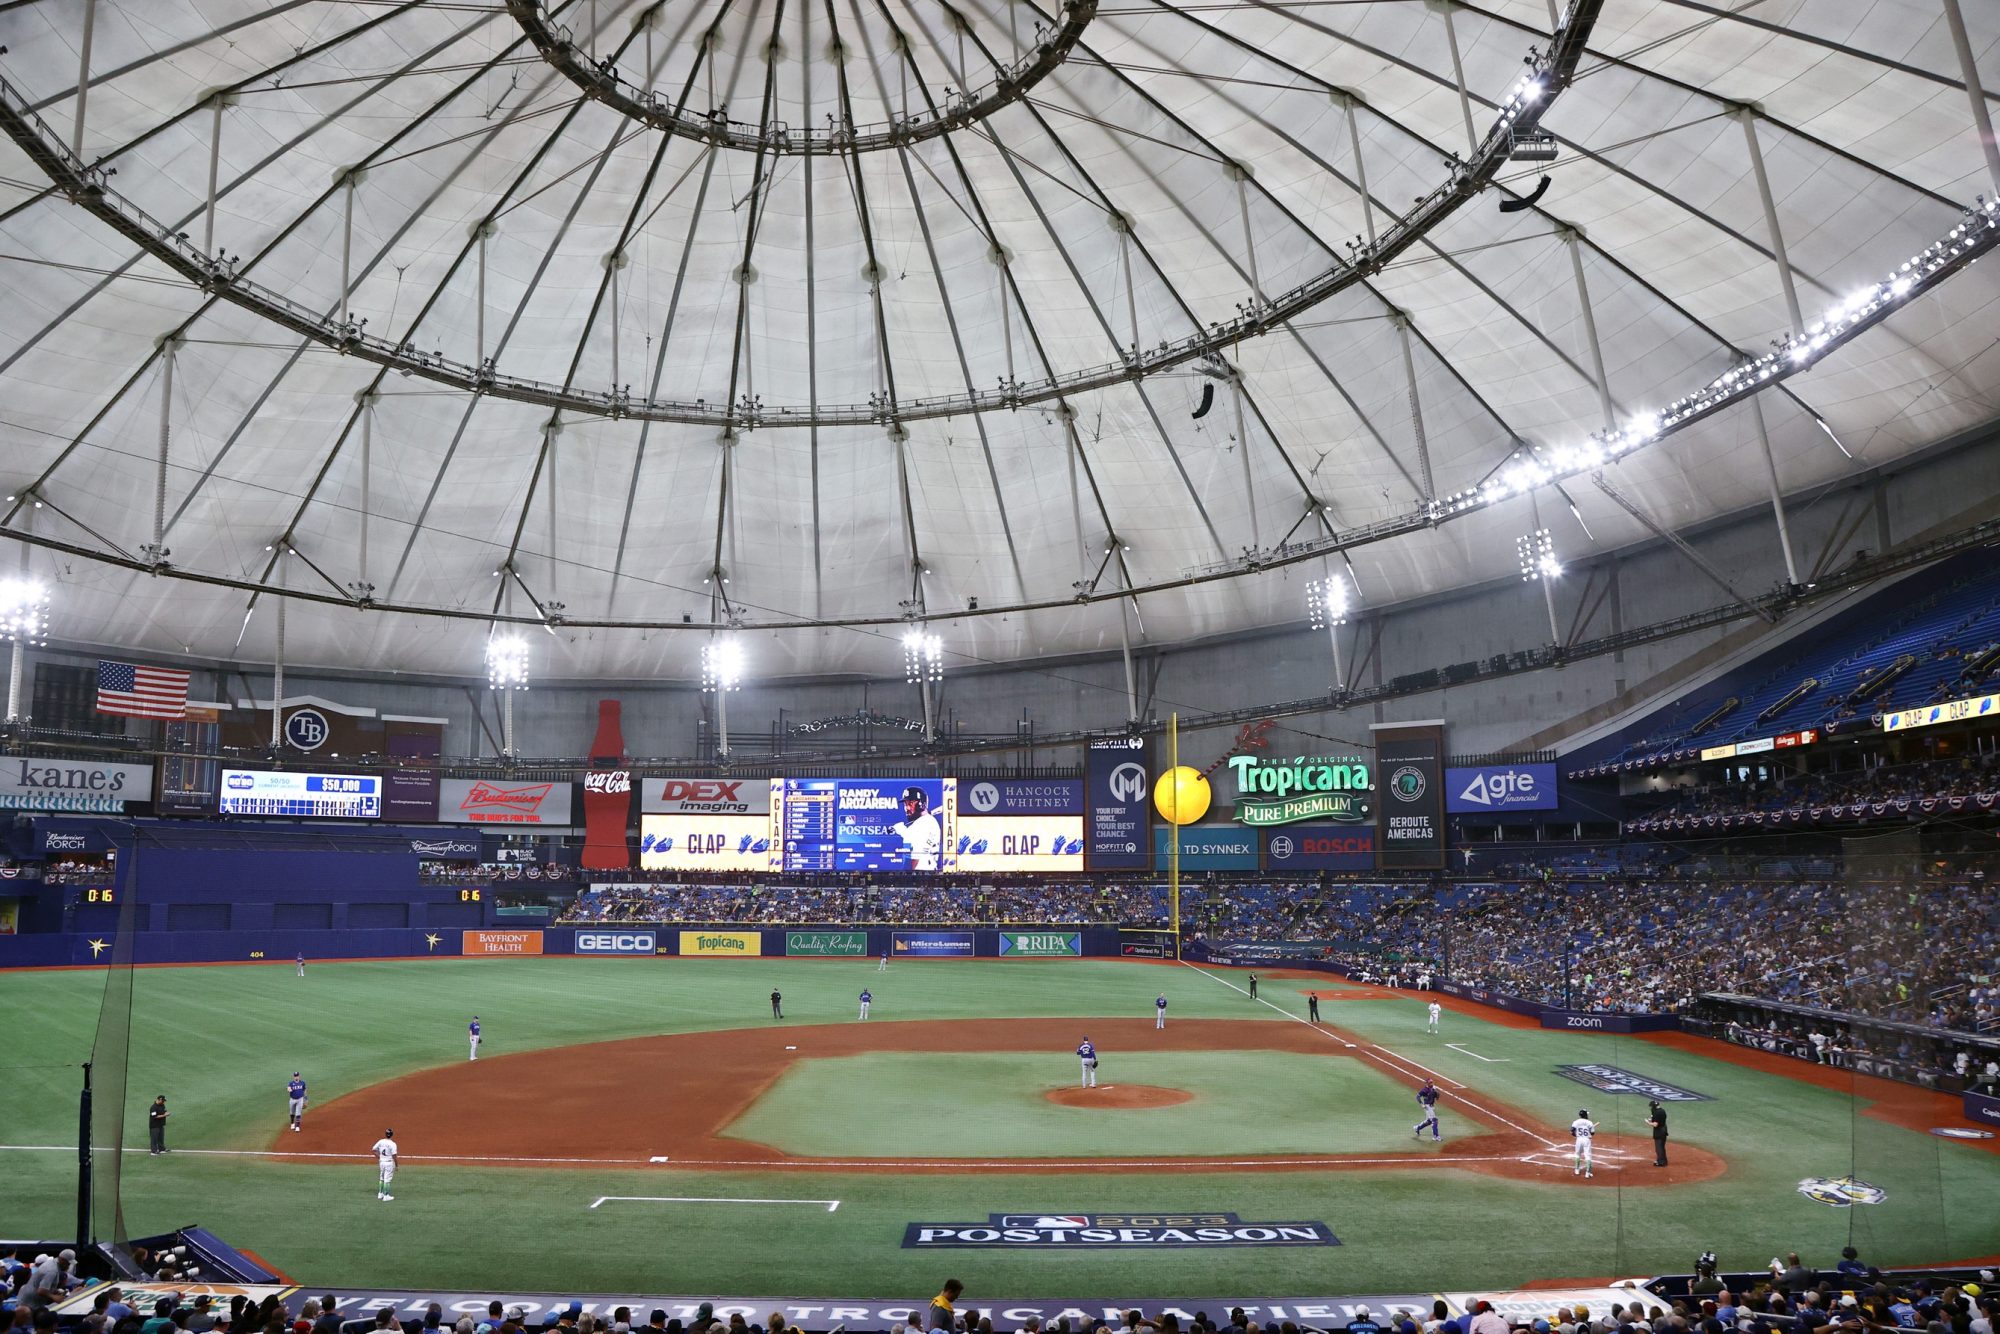 Rays' Historically Low Playoff Attendance Highlights Market Challenge